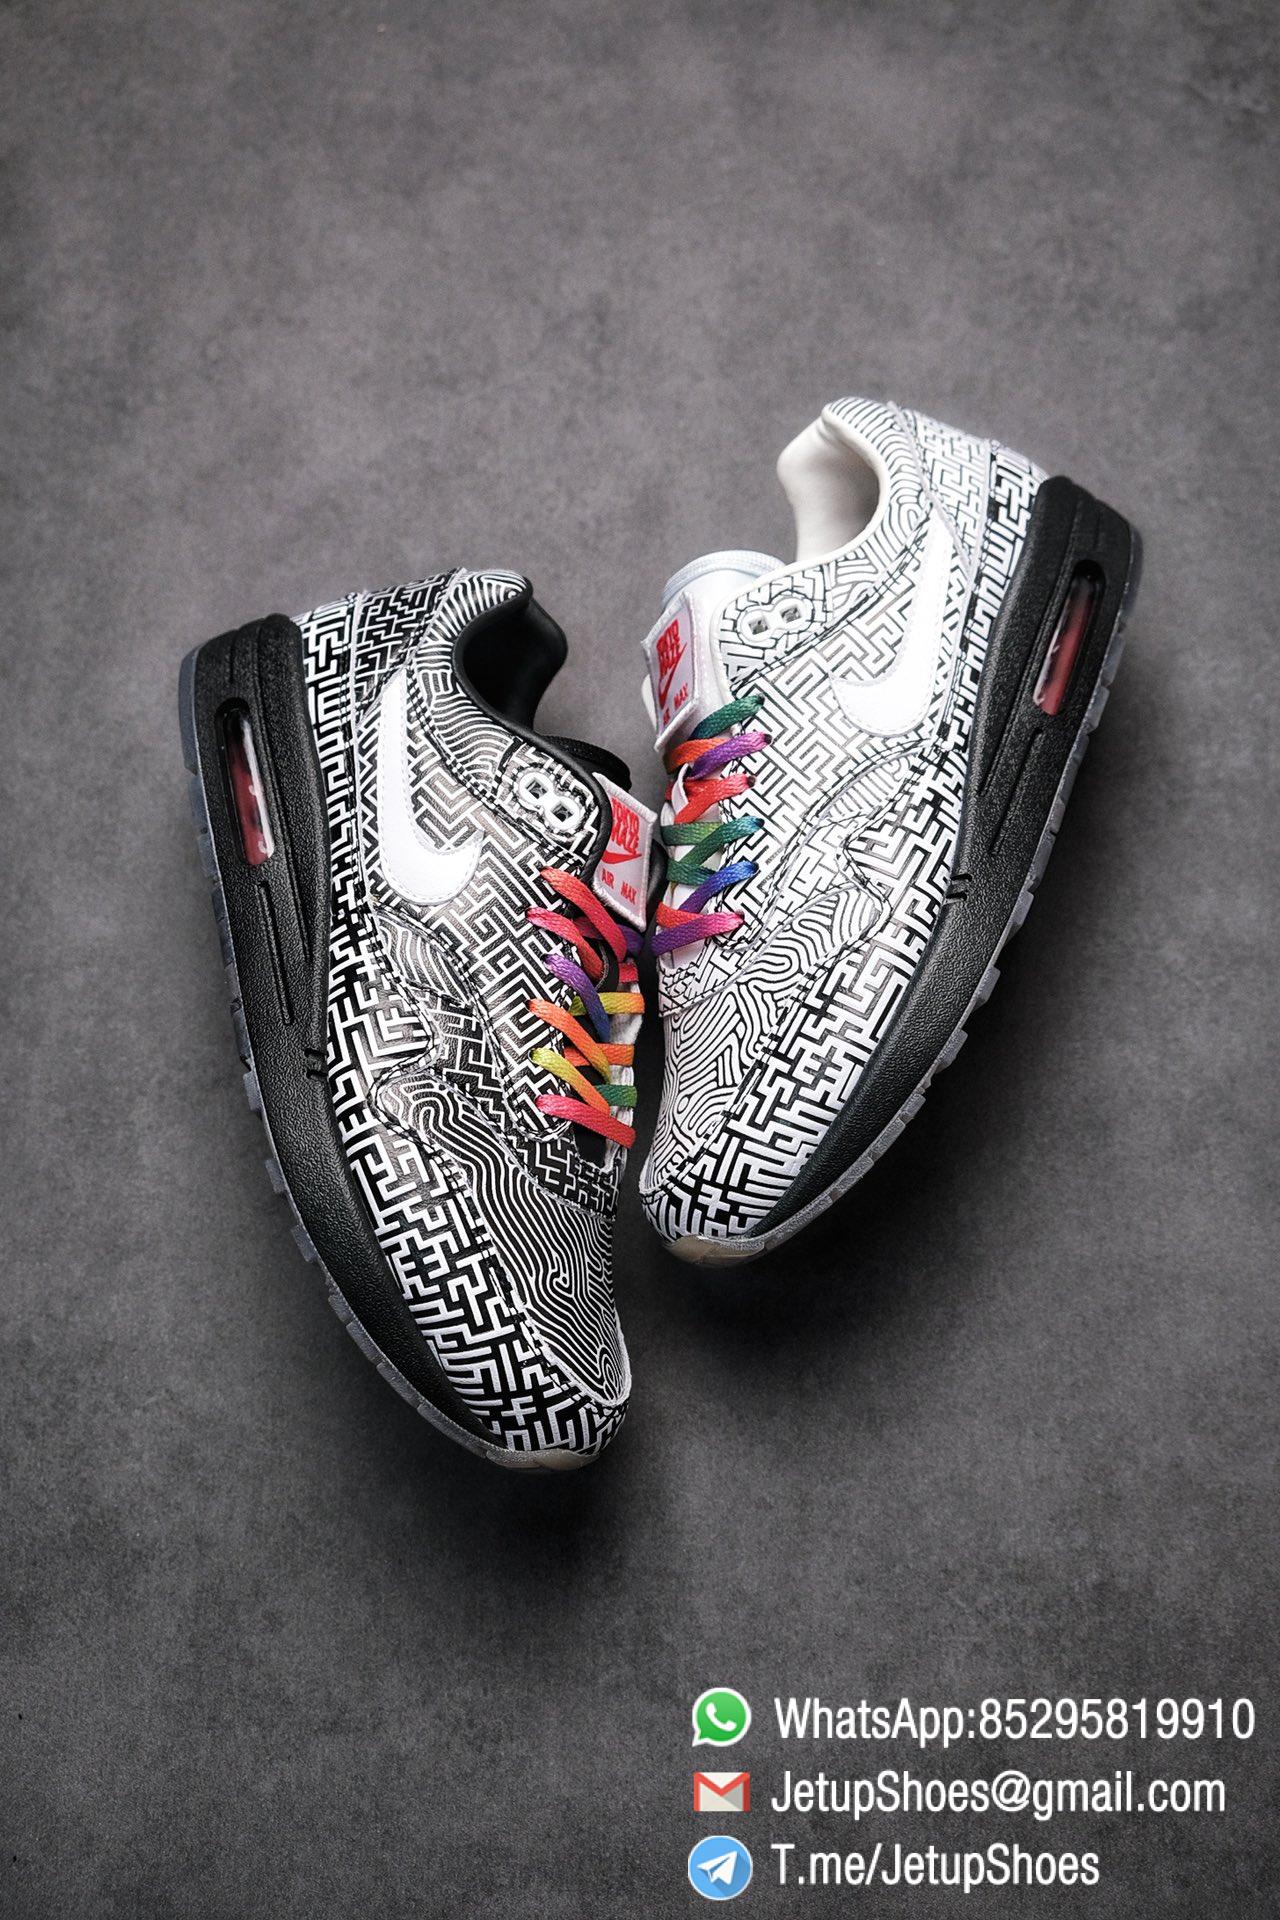 Best Replica Sneakers Nike Air Max 1 On Air Tokyo Maze Monochromatic Labyrinth Leather Upper Rainbow Colored Laces 03